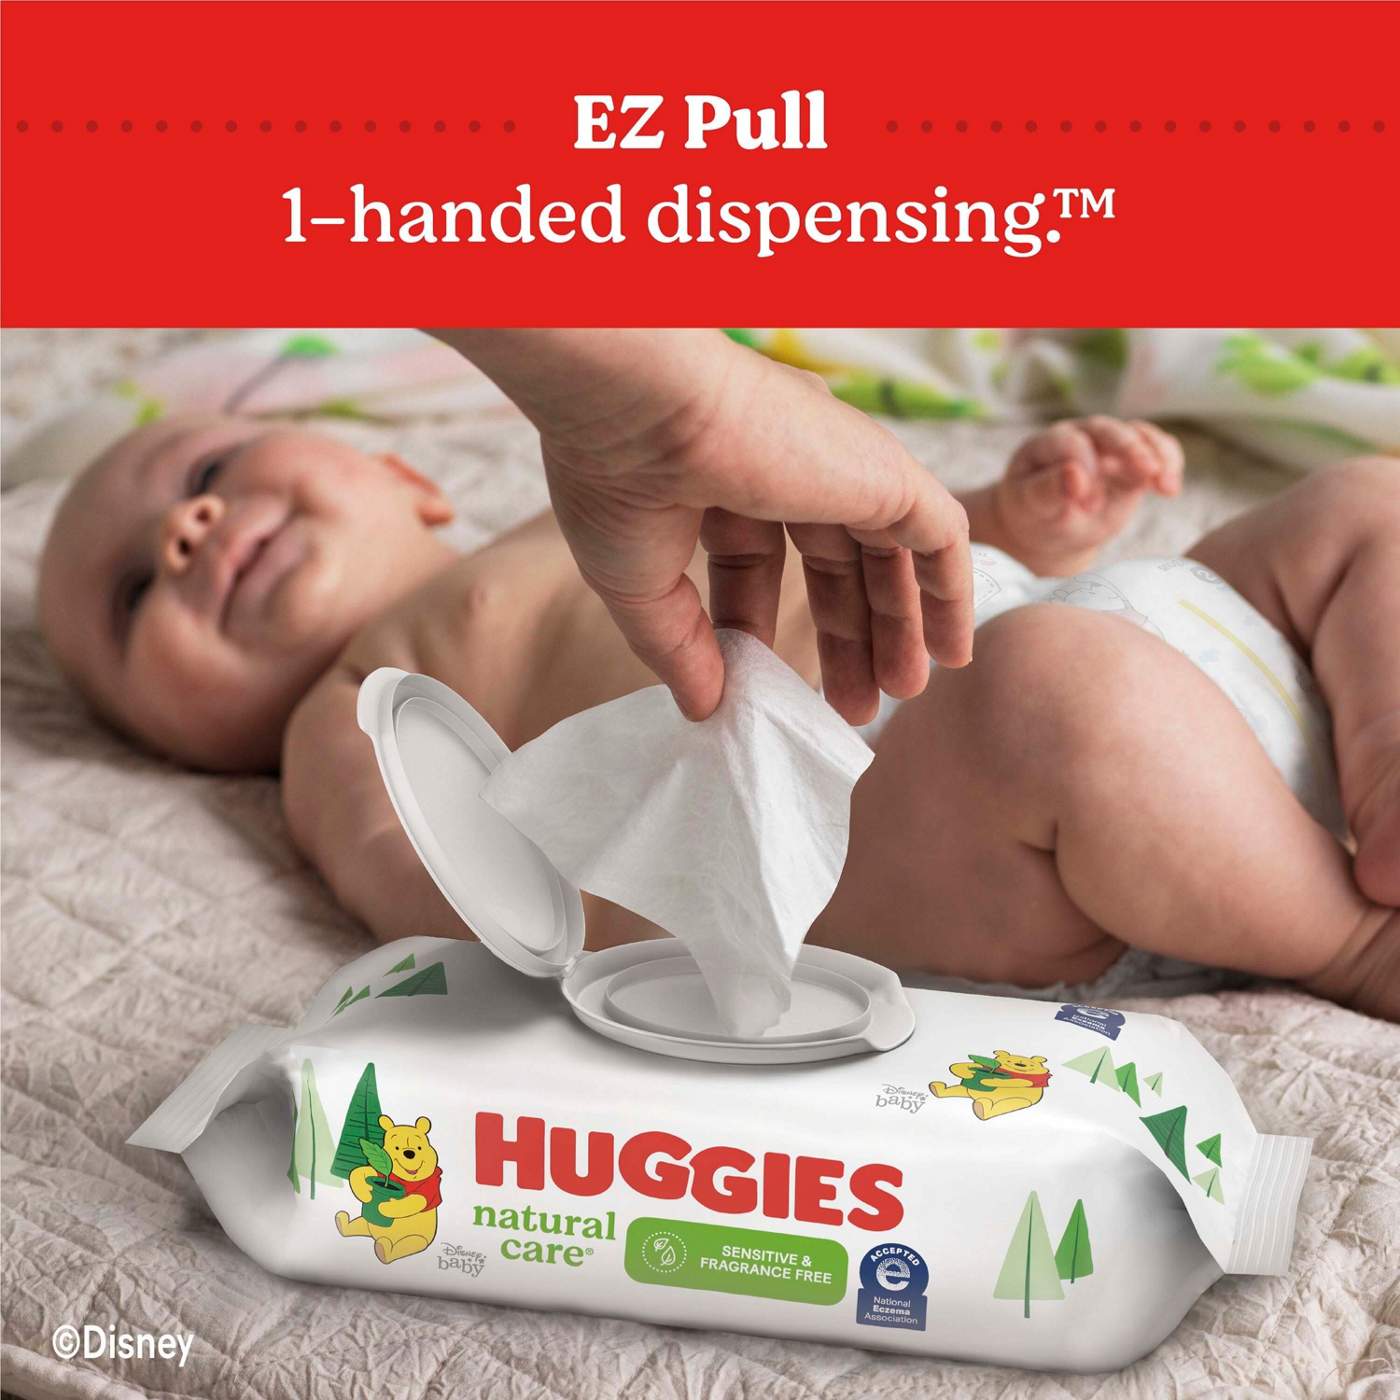 Huggies Natural Care Sensitive Baby Wipes - Fragrance Free; image 8 of 8